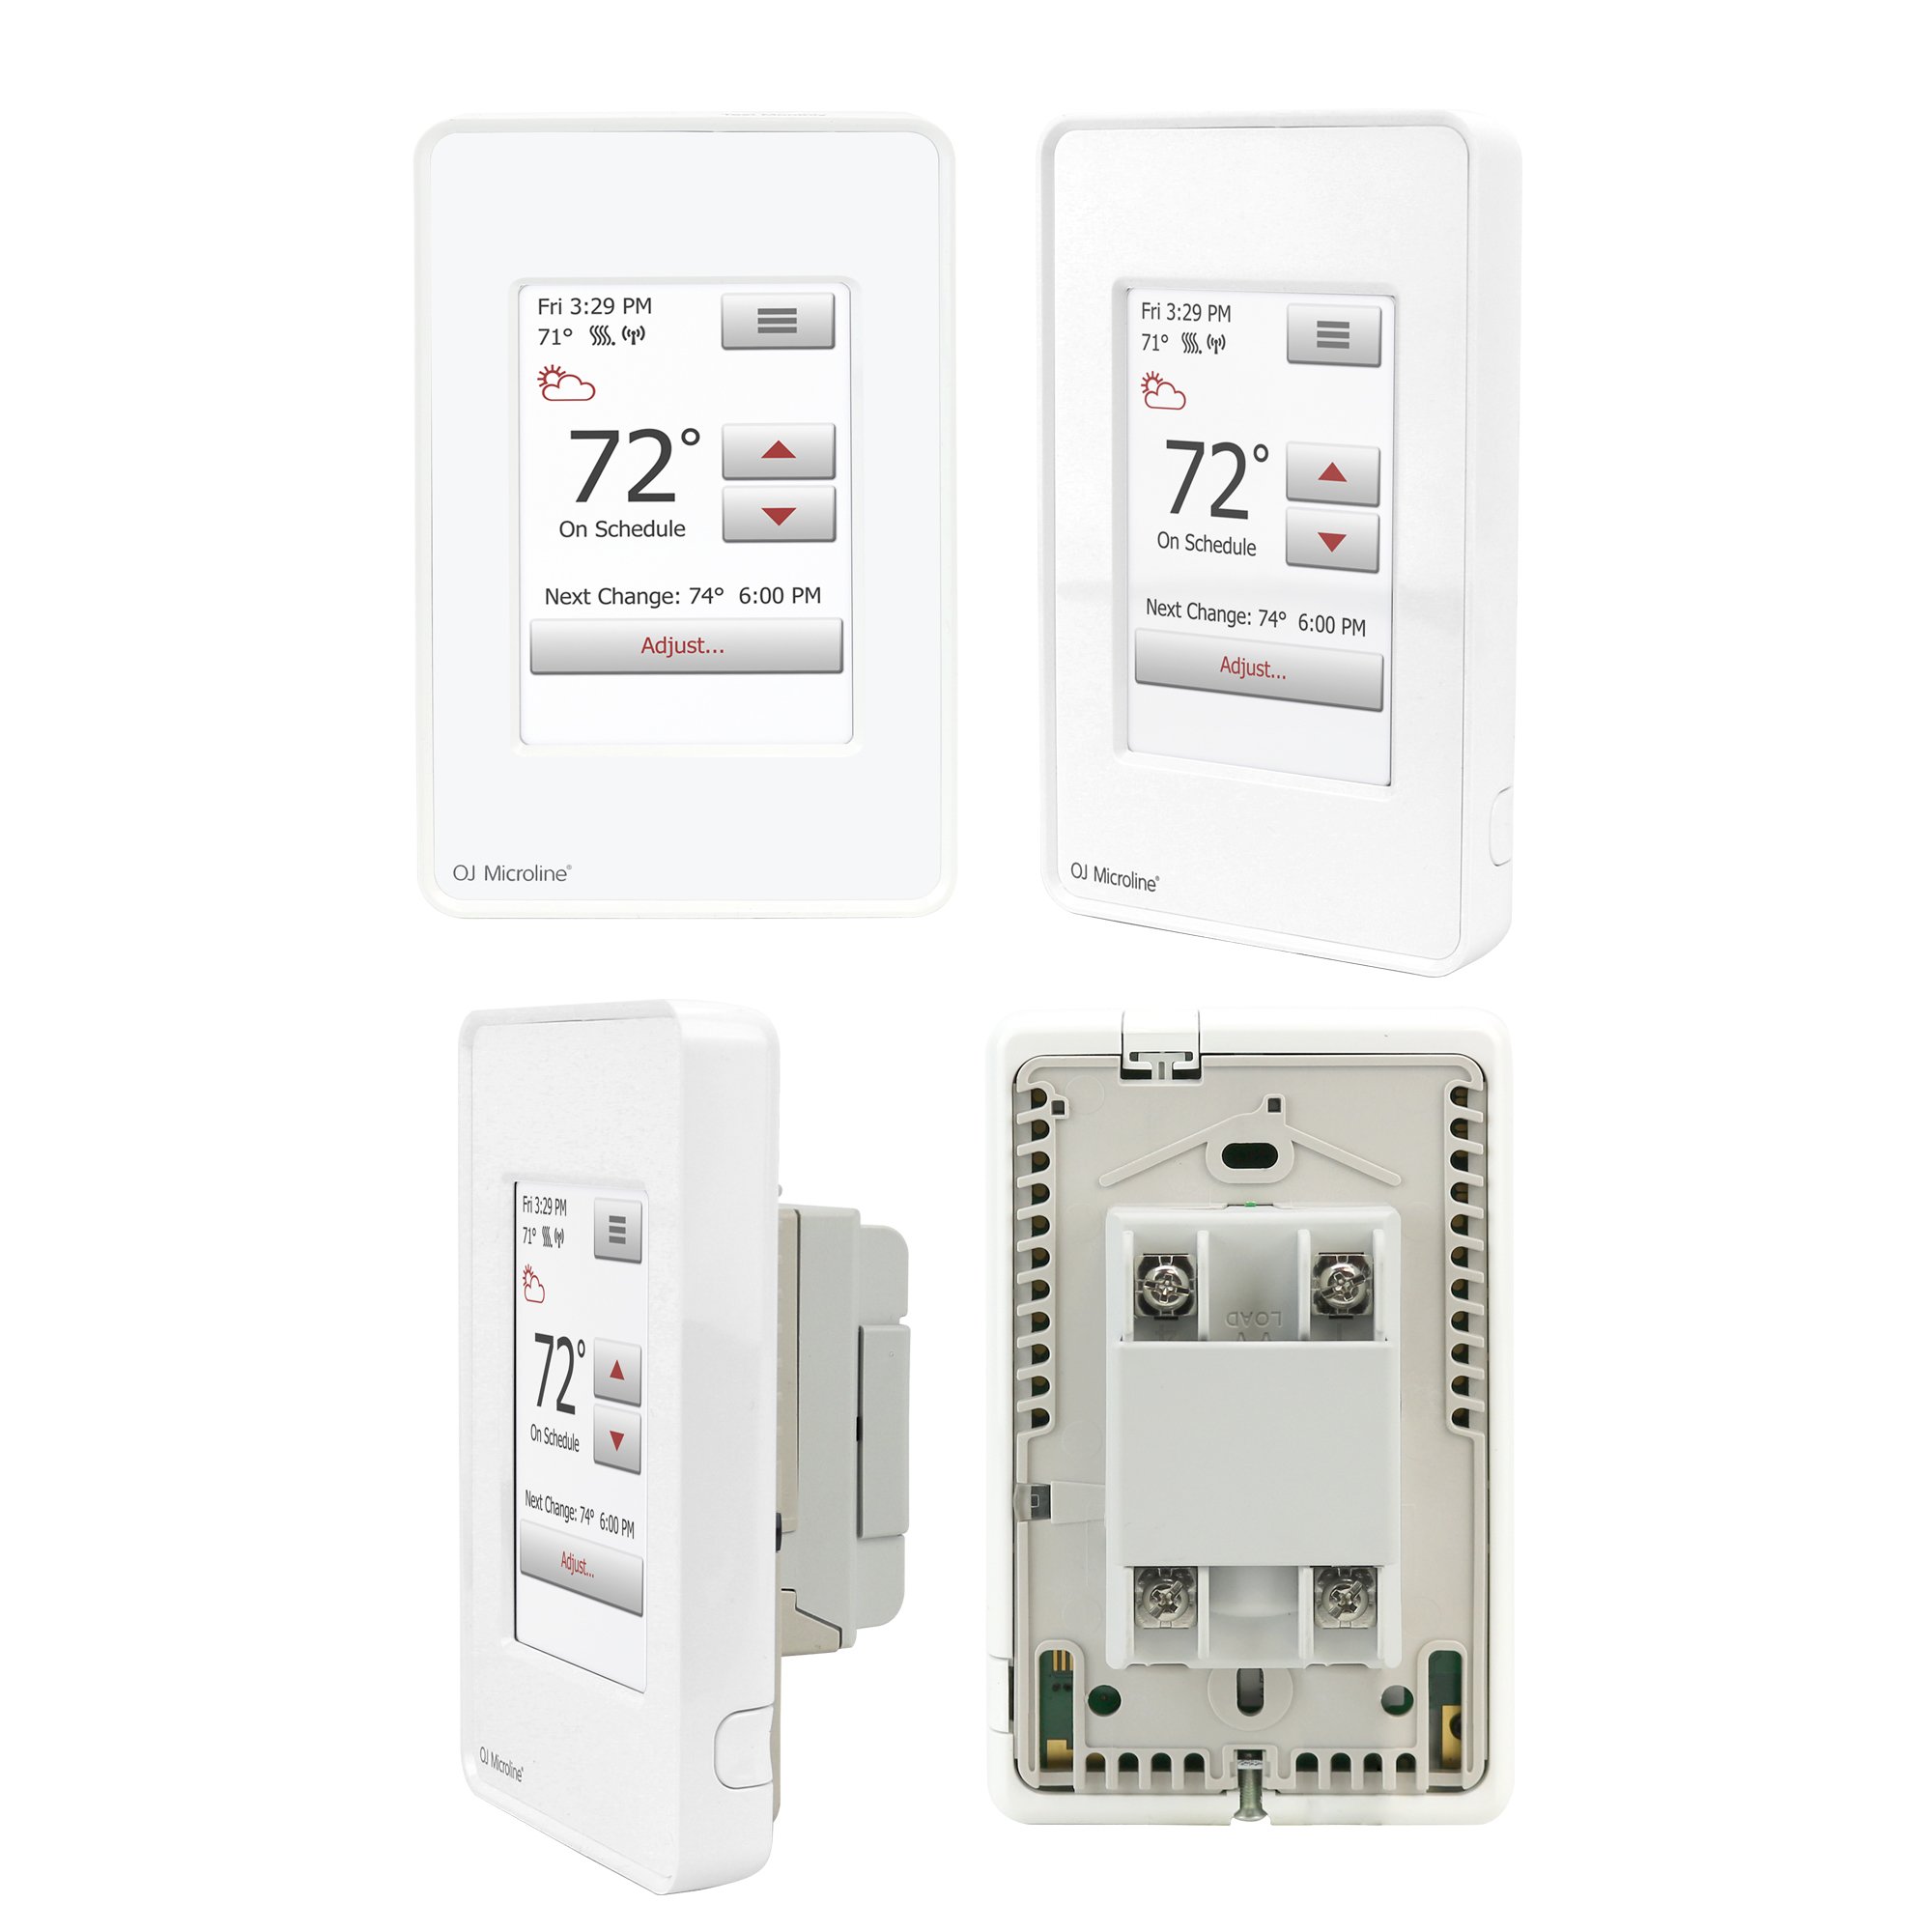 WarmlyYours UWG4-4999 nSpire Touch WiFi Programmable Smart Thermostat, with Touchscreen, Class A GFCI, and Floor Sensor (White)